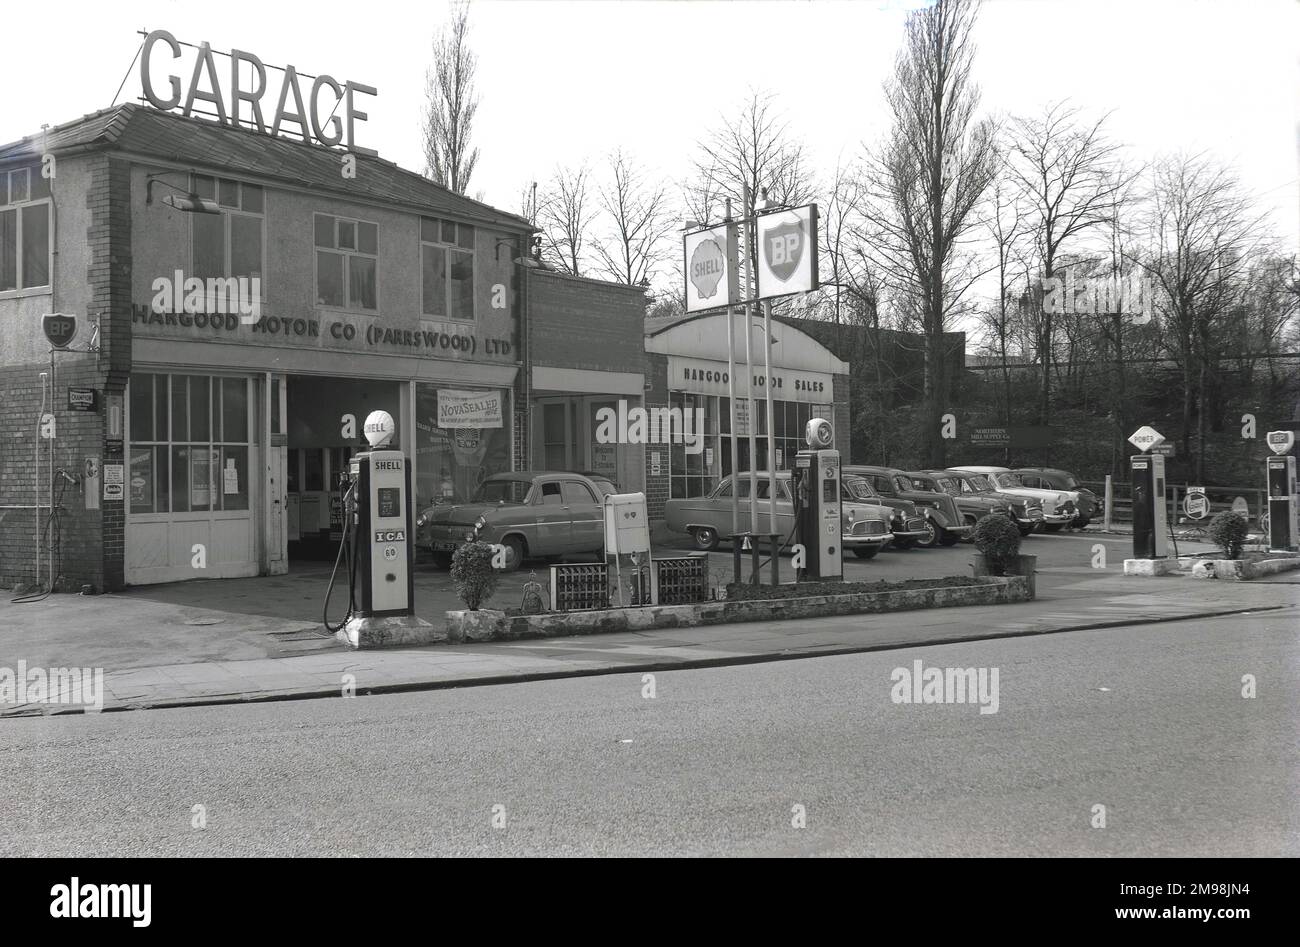 1957, historical, exterior of the Hargood Motor Co on the Wilmslow Rd, Didsbury, Manchester, England, UK. The word Garage is displayed in large capital letters on the roof of the two-storey building and cars of the day are parked outside the motor sales dept on the right of the picture. As can be seen by the signs and the forecourt petrol pumps, different brands of fuel including BP, Shell, Power and National, were offered to the motorist of this era. Stock Photo